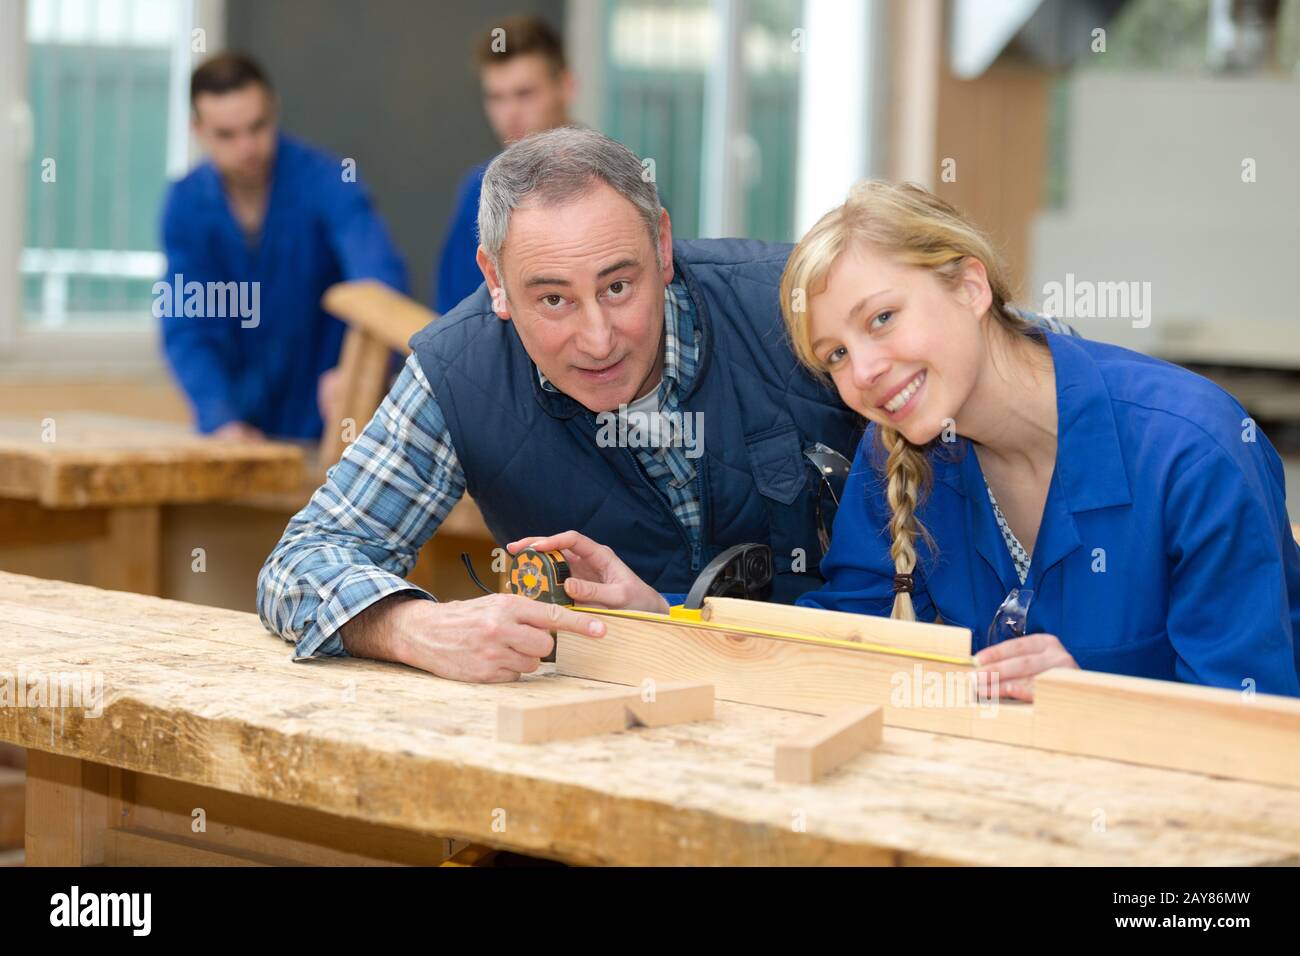 Woman Apprentice And Man In Workshop Stock Photo 343773609 Alamy